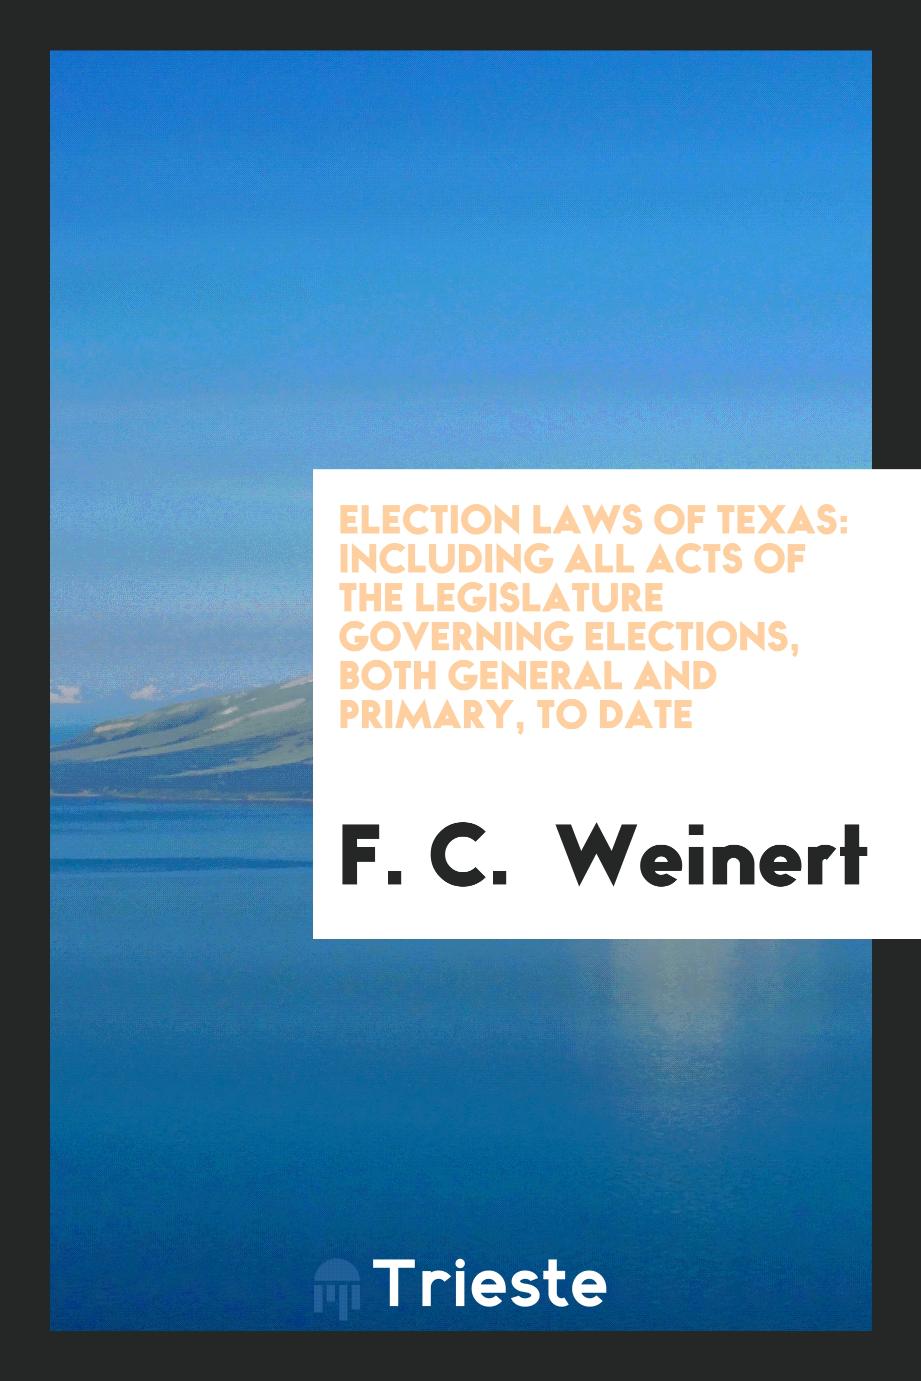 Election Laws of Texas: Including All Acts of the Legislature Governing elections, both general and primary, to date